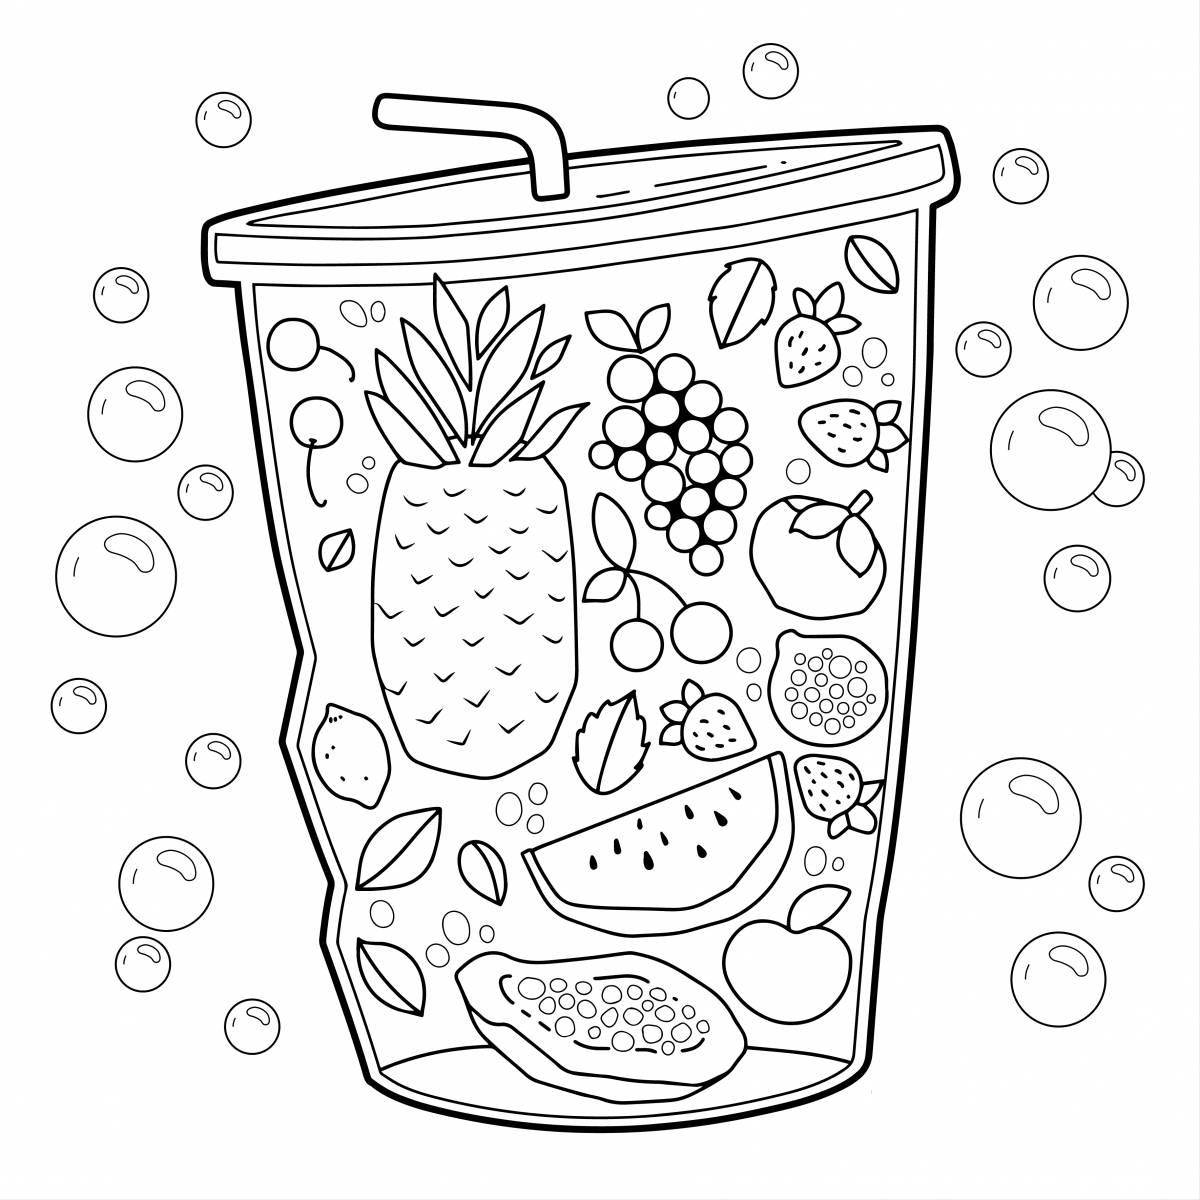 Cute juice coloring page for kids